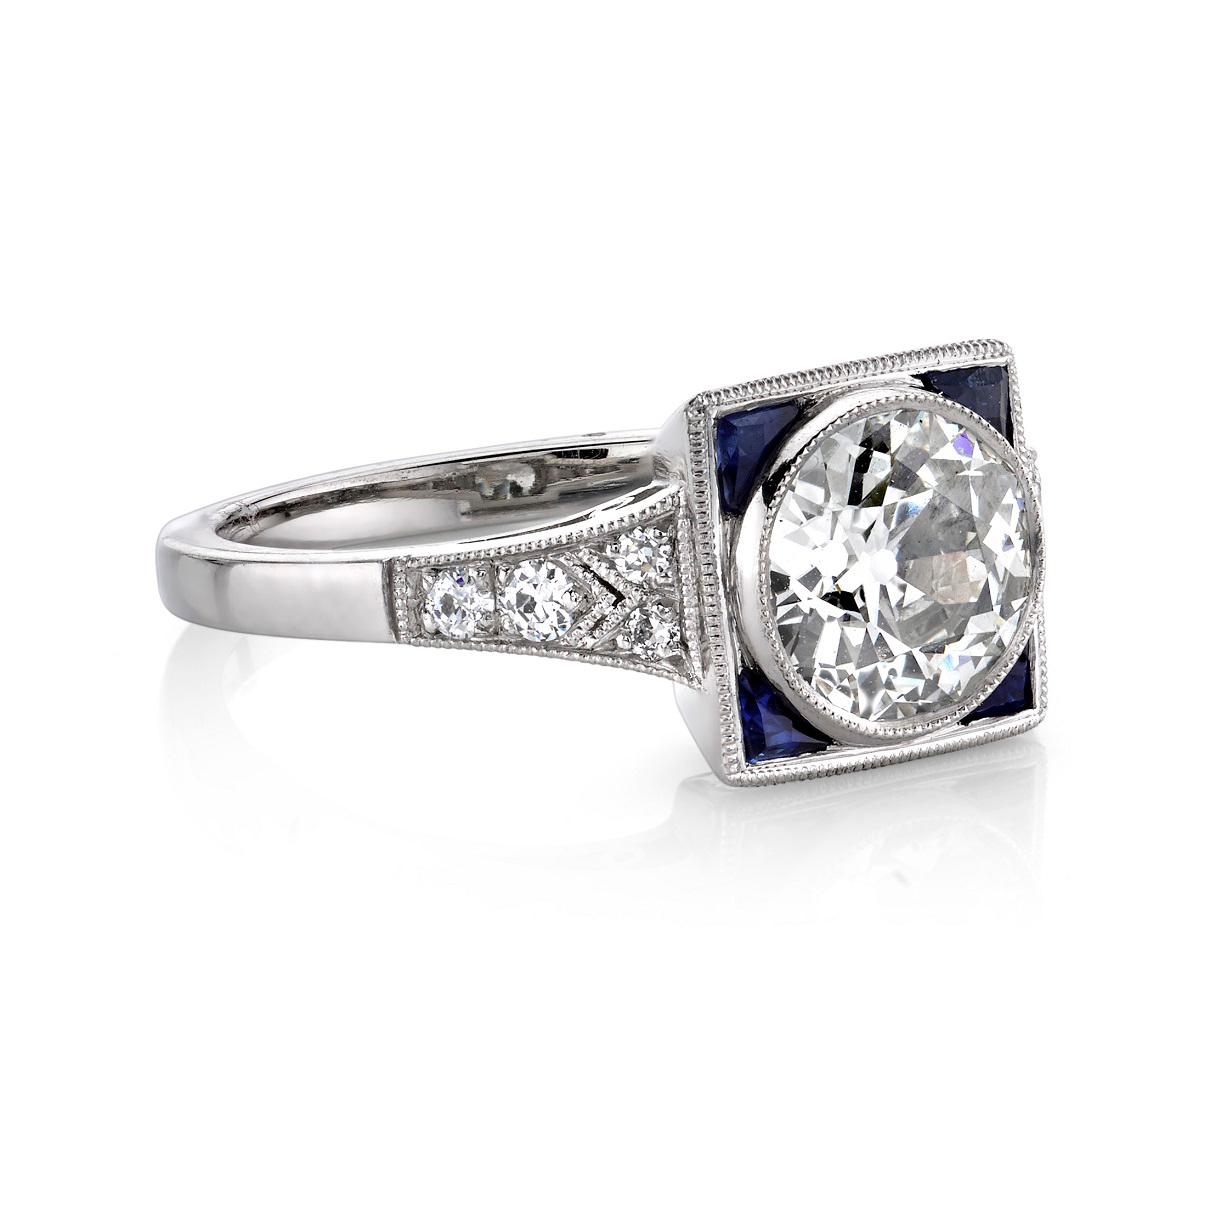 1.45ct K/VS1 EGL certified old European cut diamond with 0.15ctw old European cut diamond accents and 0.17ctw French cut sapphire accents set in a handcrafted platinum mounting. 

Ring is currently a size 6 and can be sized to fit. 